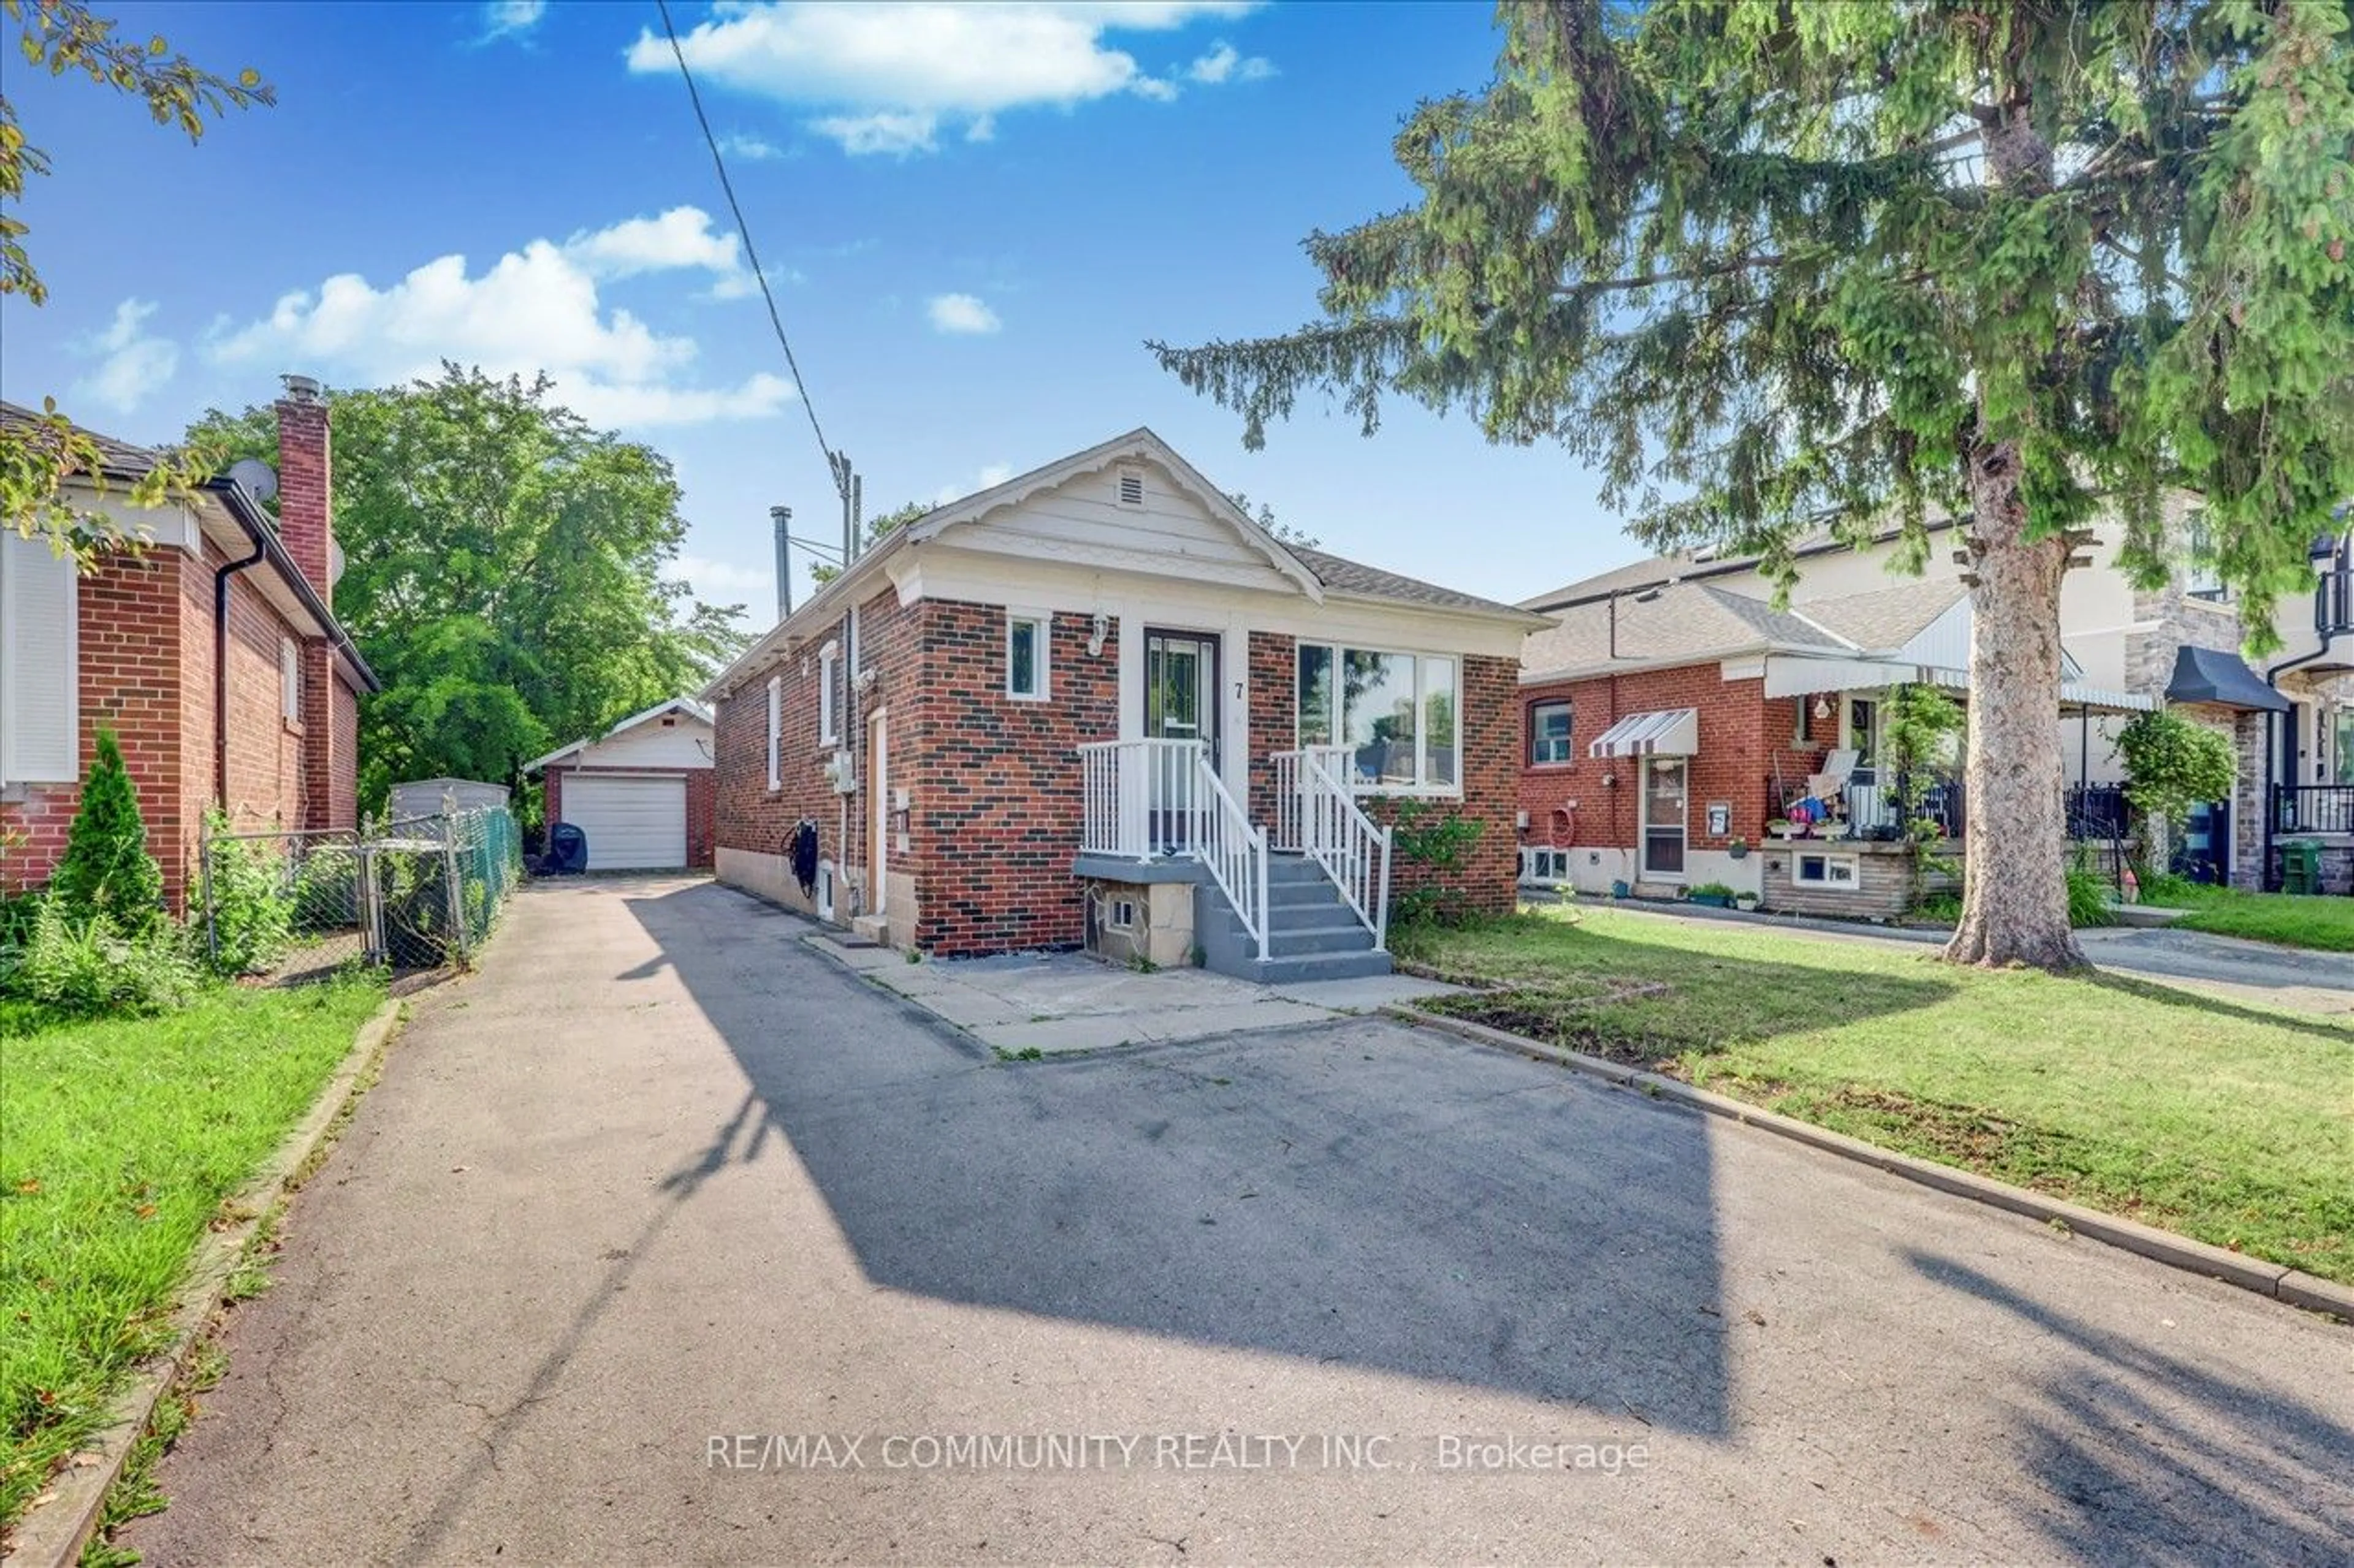 Frontside or backside of a home for 7 Princemere Cres, Toronto Ontario M1R 3W8